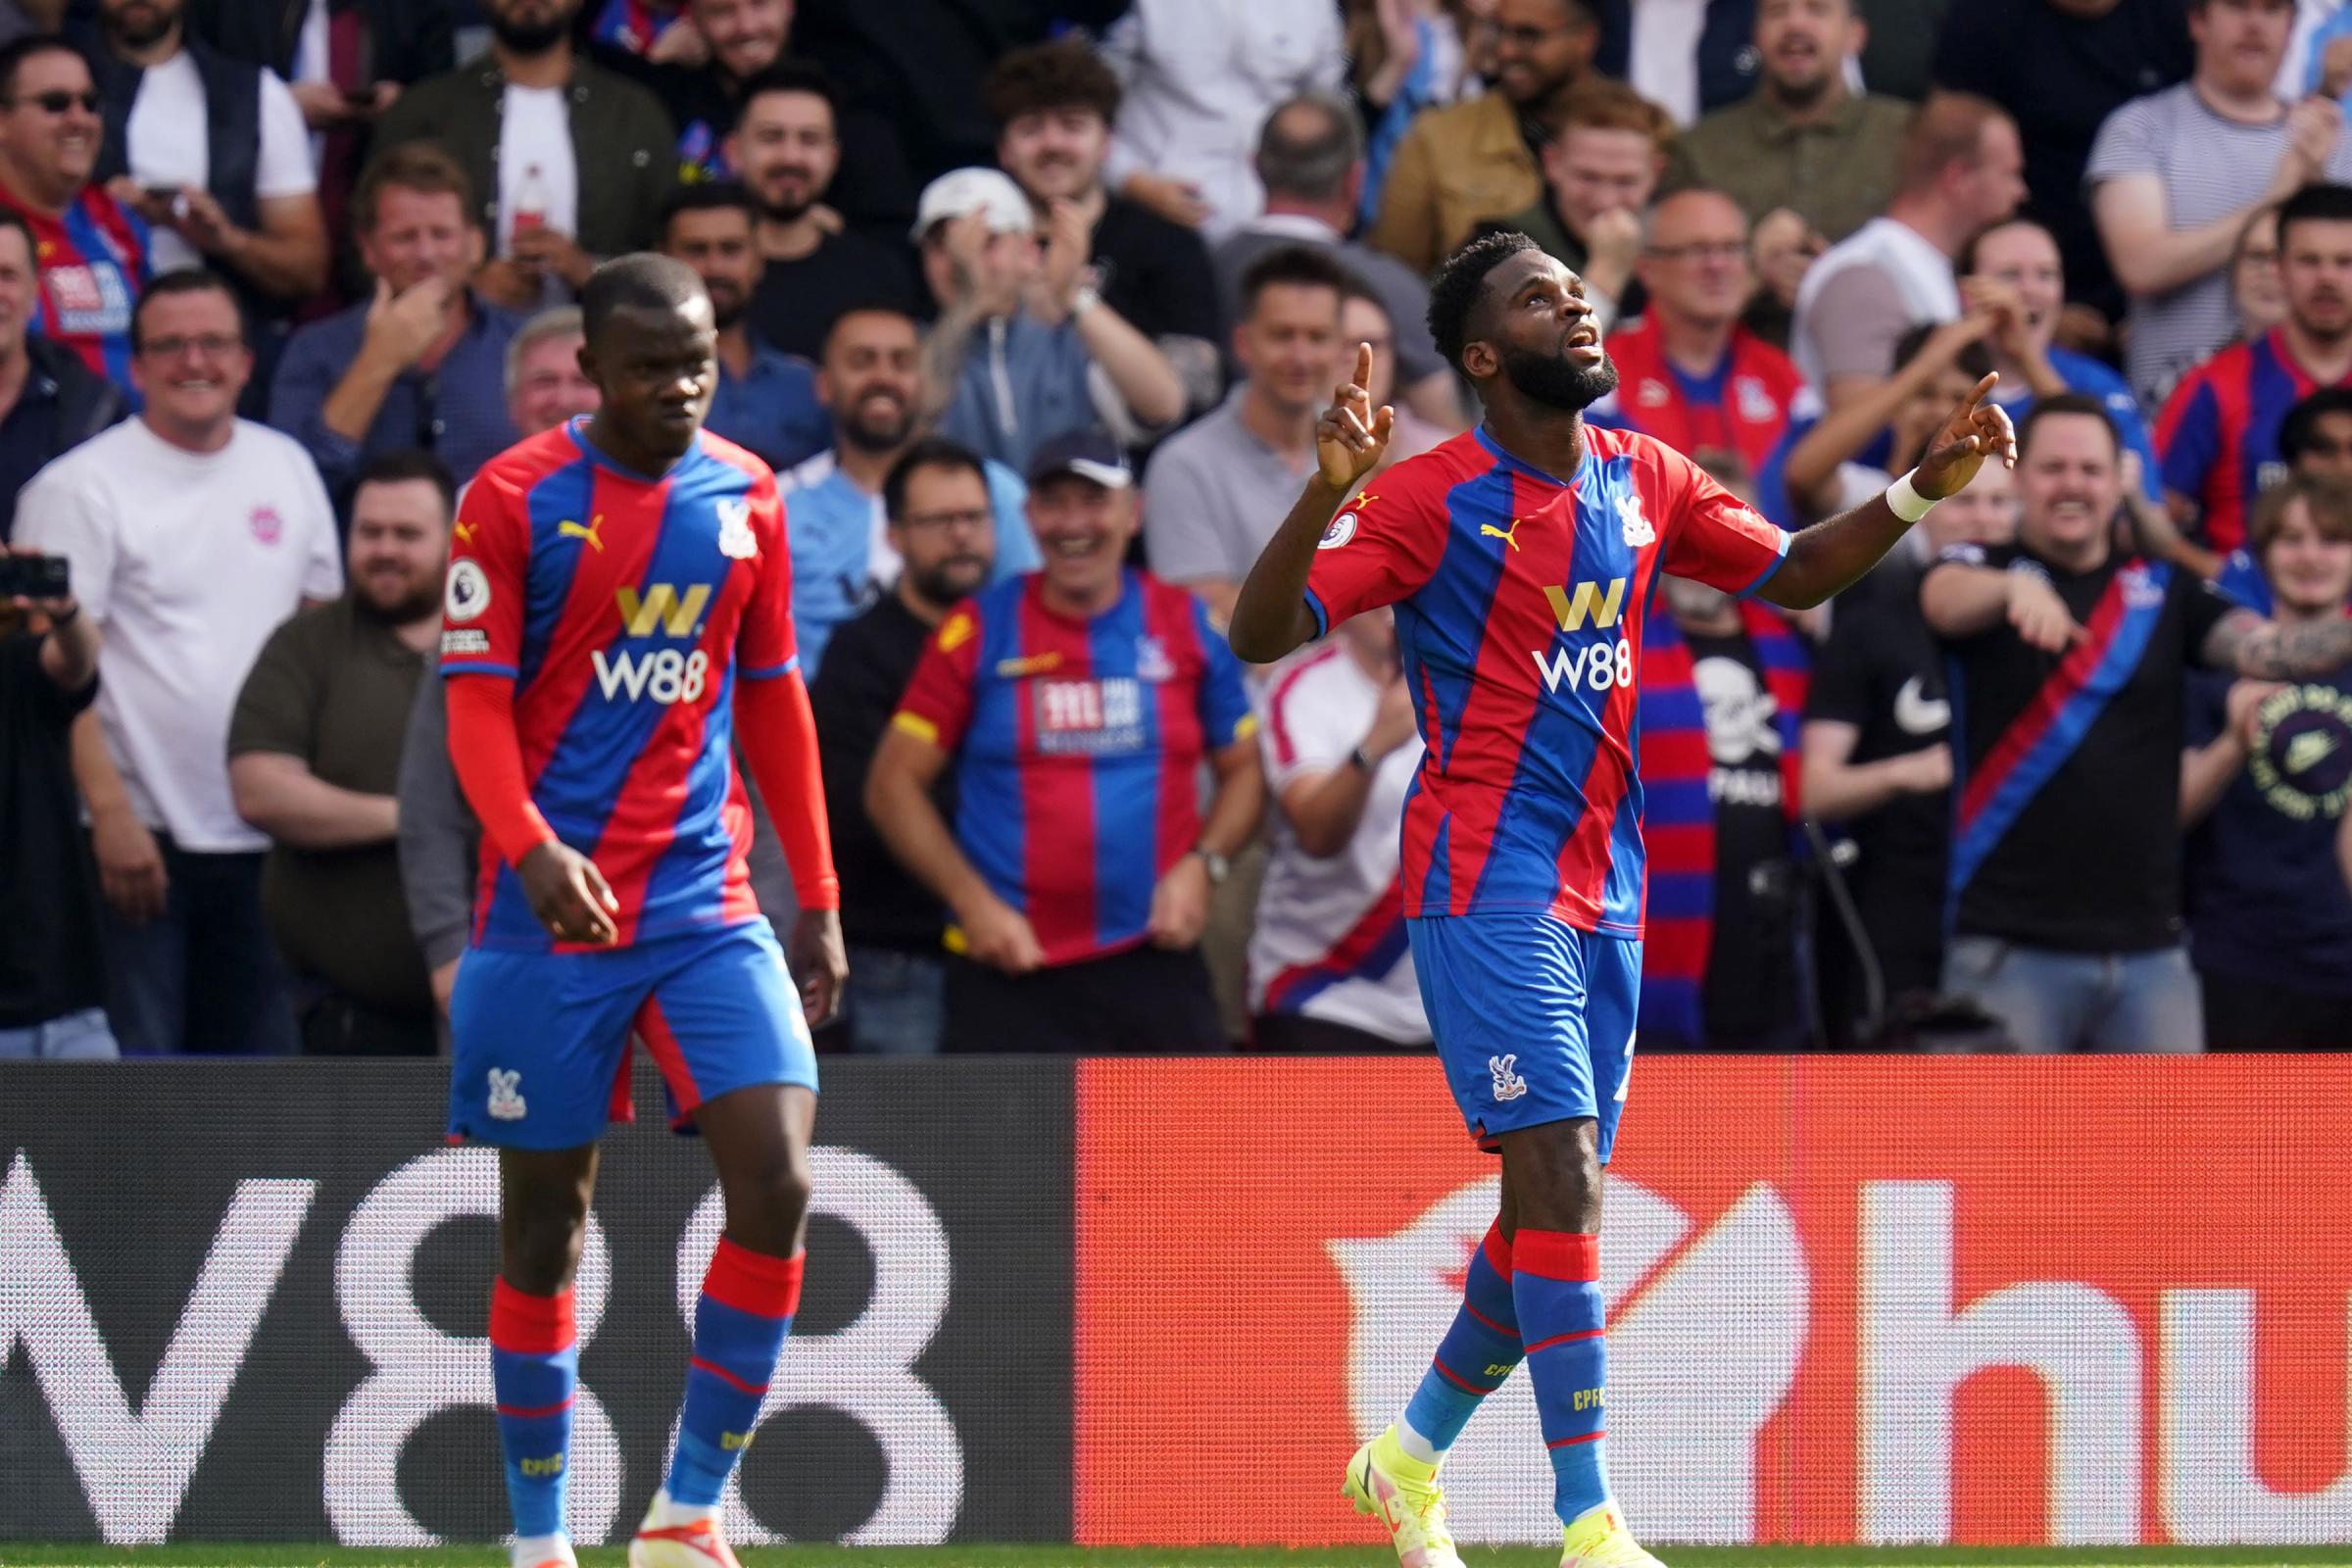 Tottenham loses perfect record in EPL in 3-0 loss at Palace